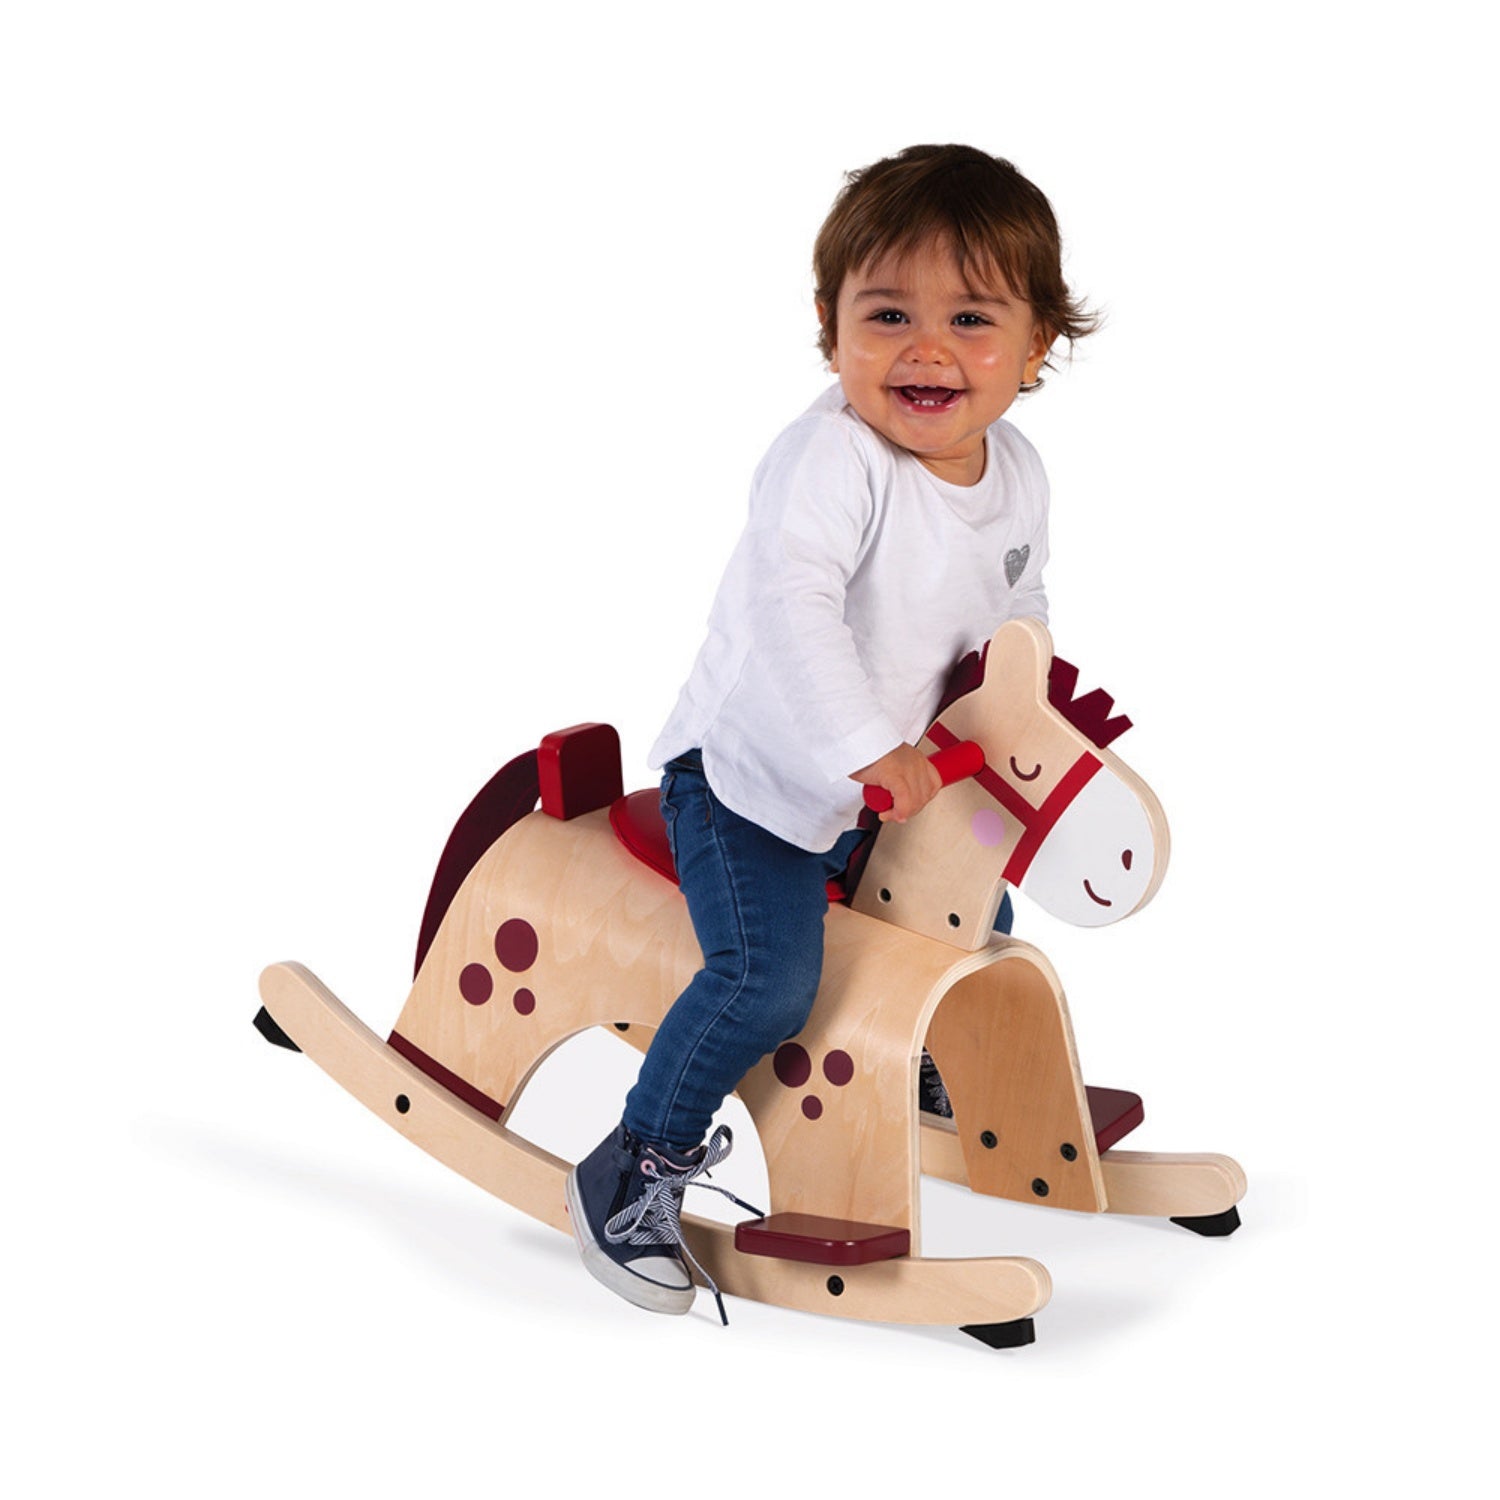 Janod Wooden Rocking Pony | Baby & Toddler Activity Wooden Toy | Lifestyle: Child Playing with Wooden Rocking Horse | BeoVERDE.ie